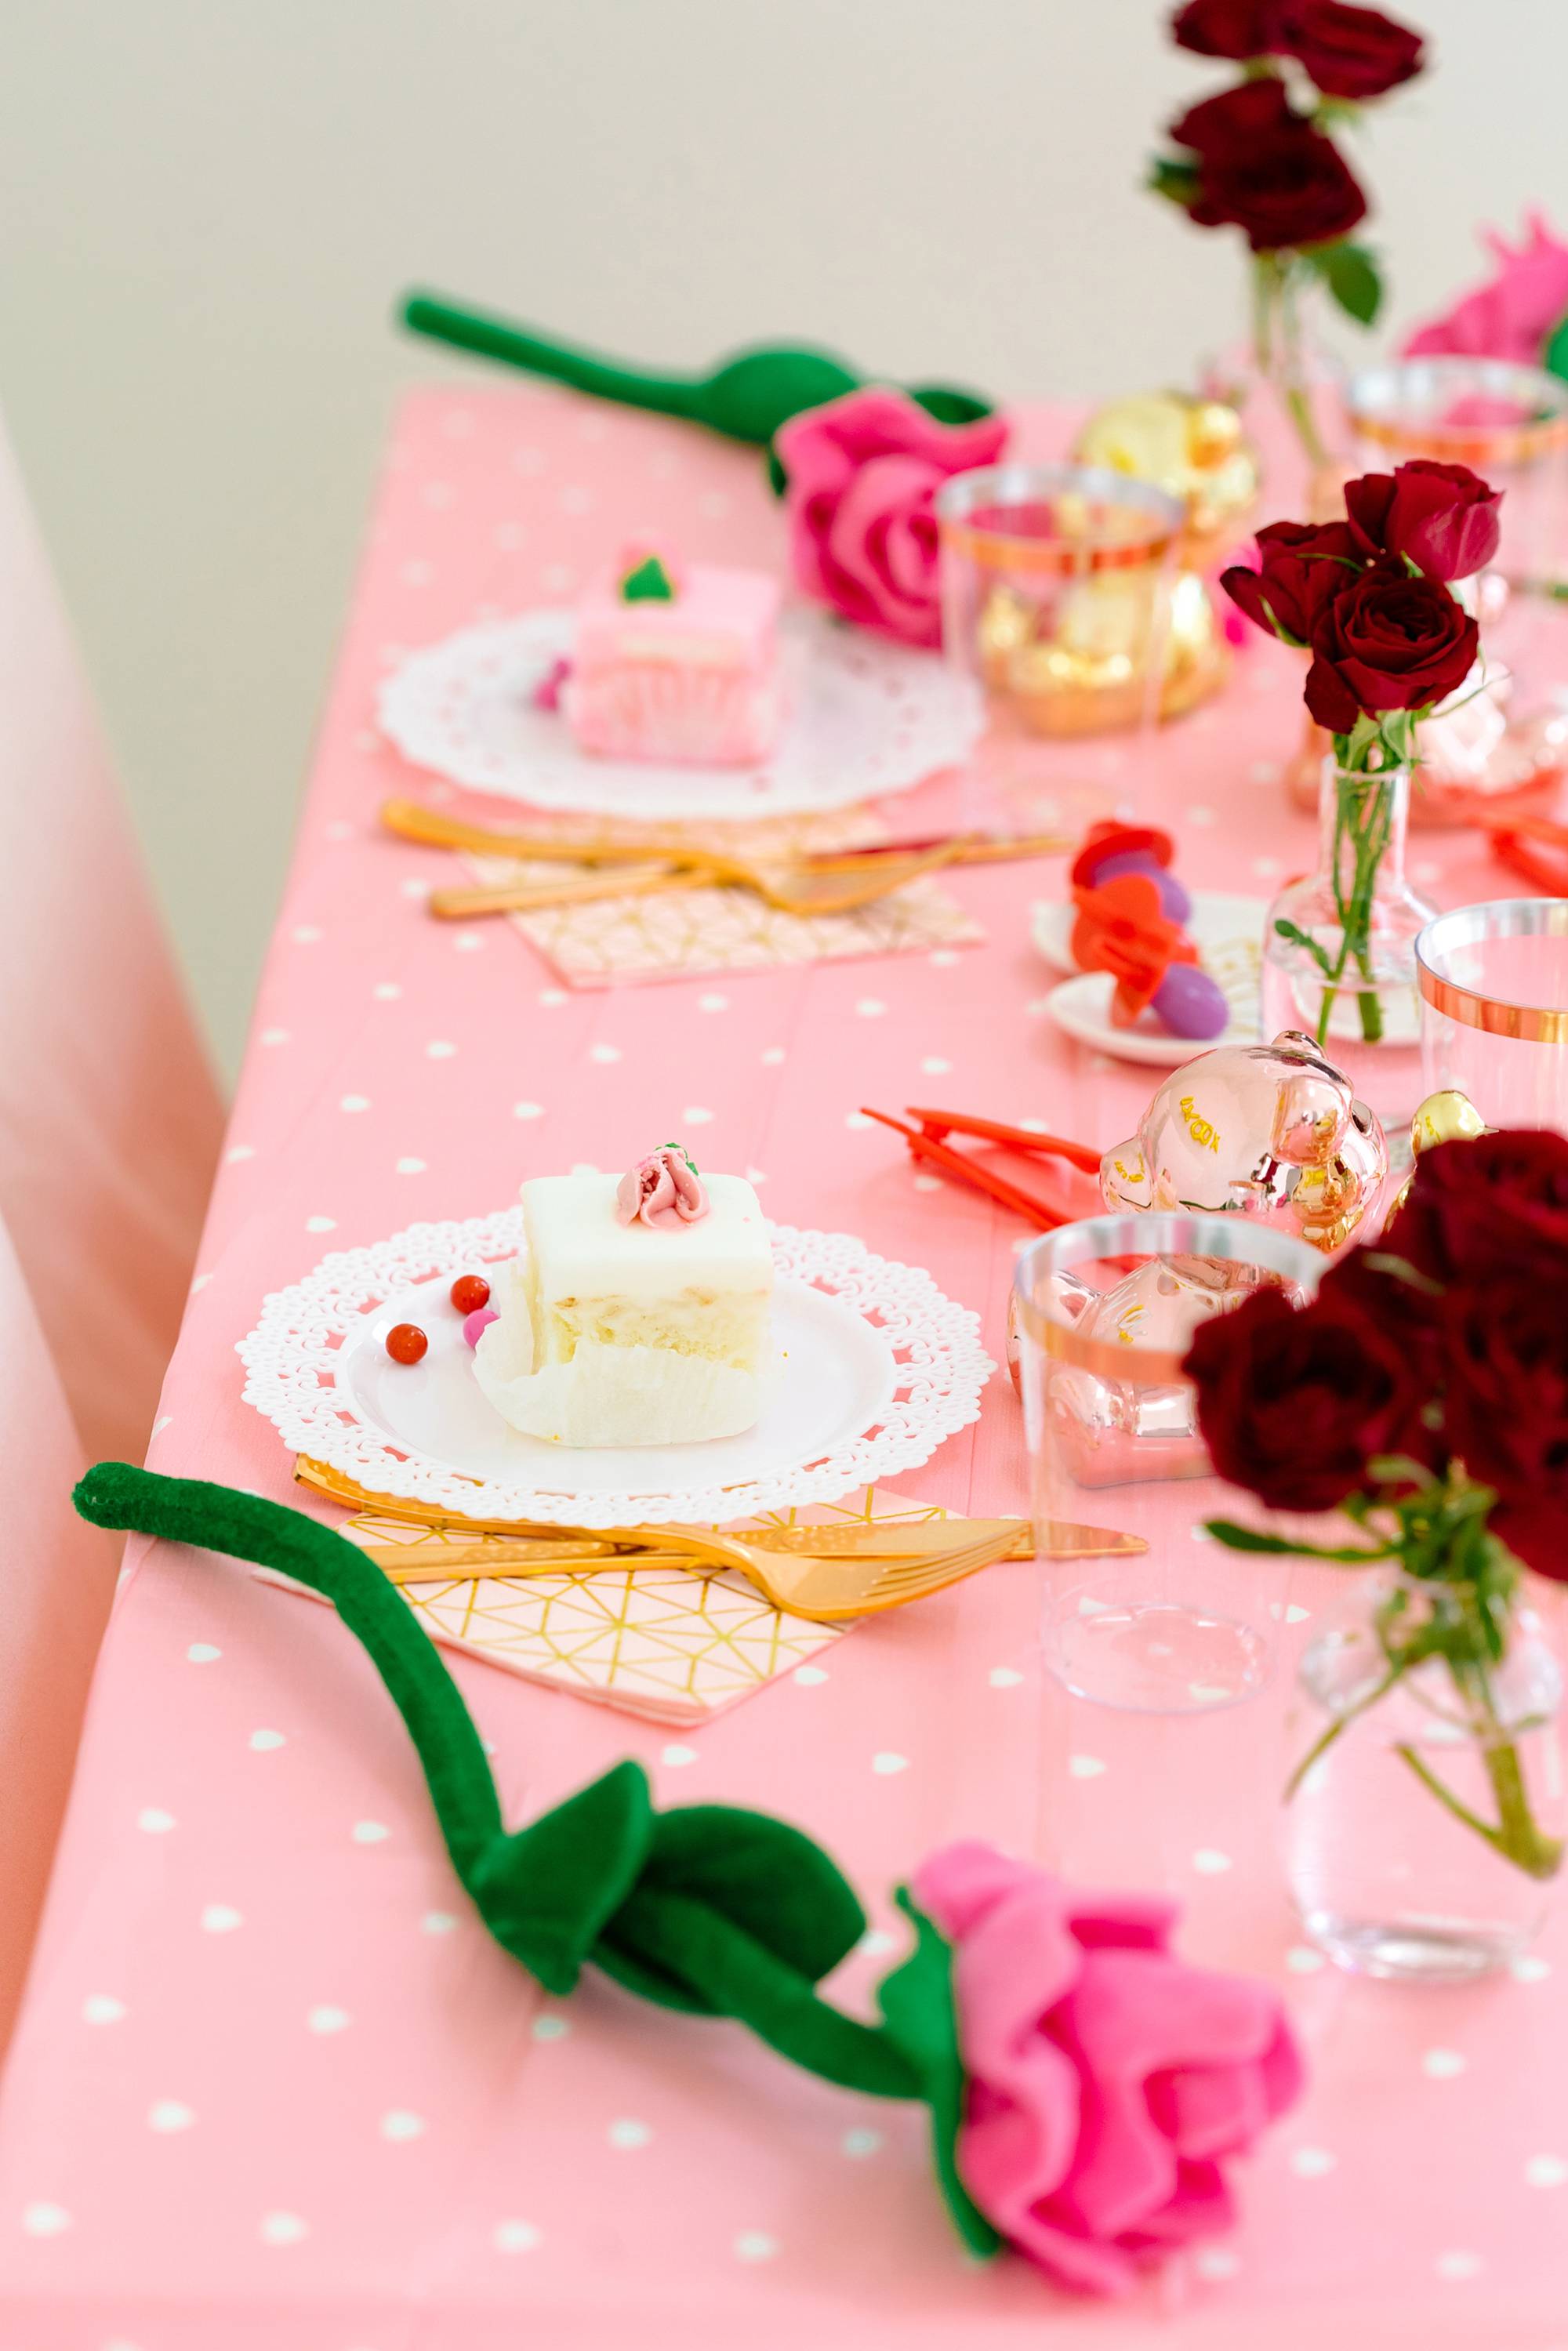 the 99 cents store Valentine's Day galentine's day decor from the 99 cents only store - a party on a budget cute girly and fun! #valentinesday #galentinesday